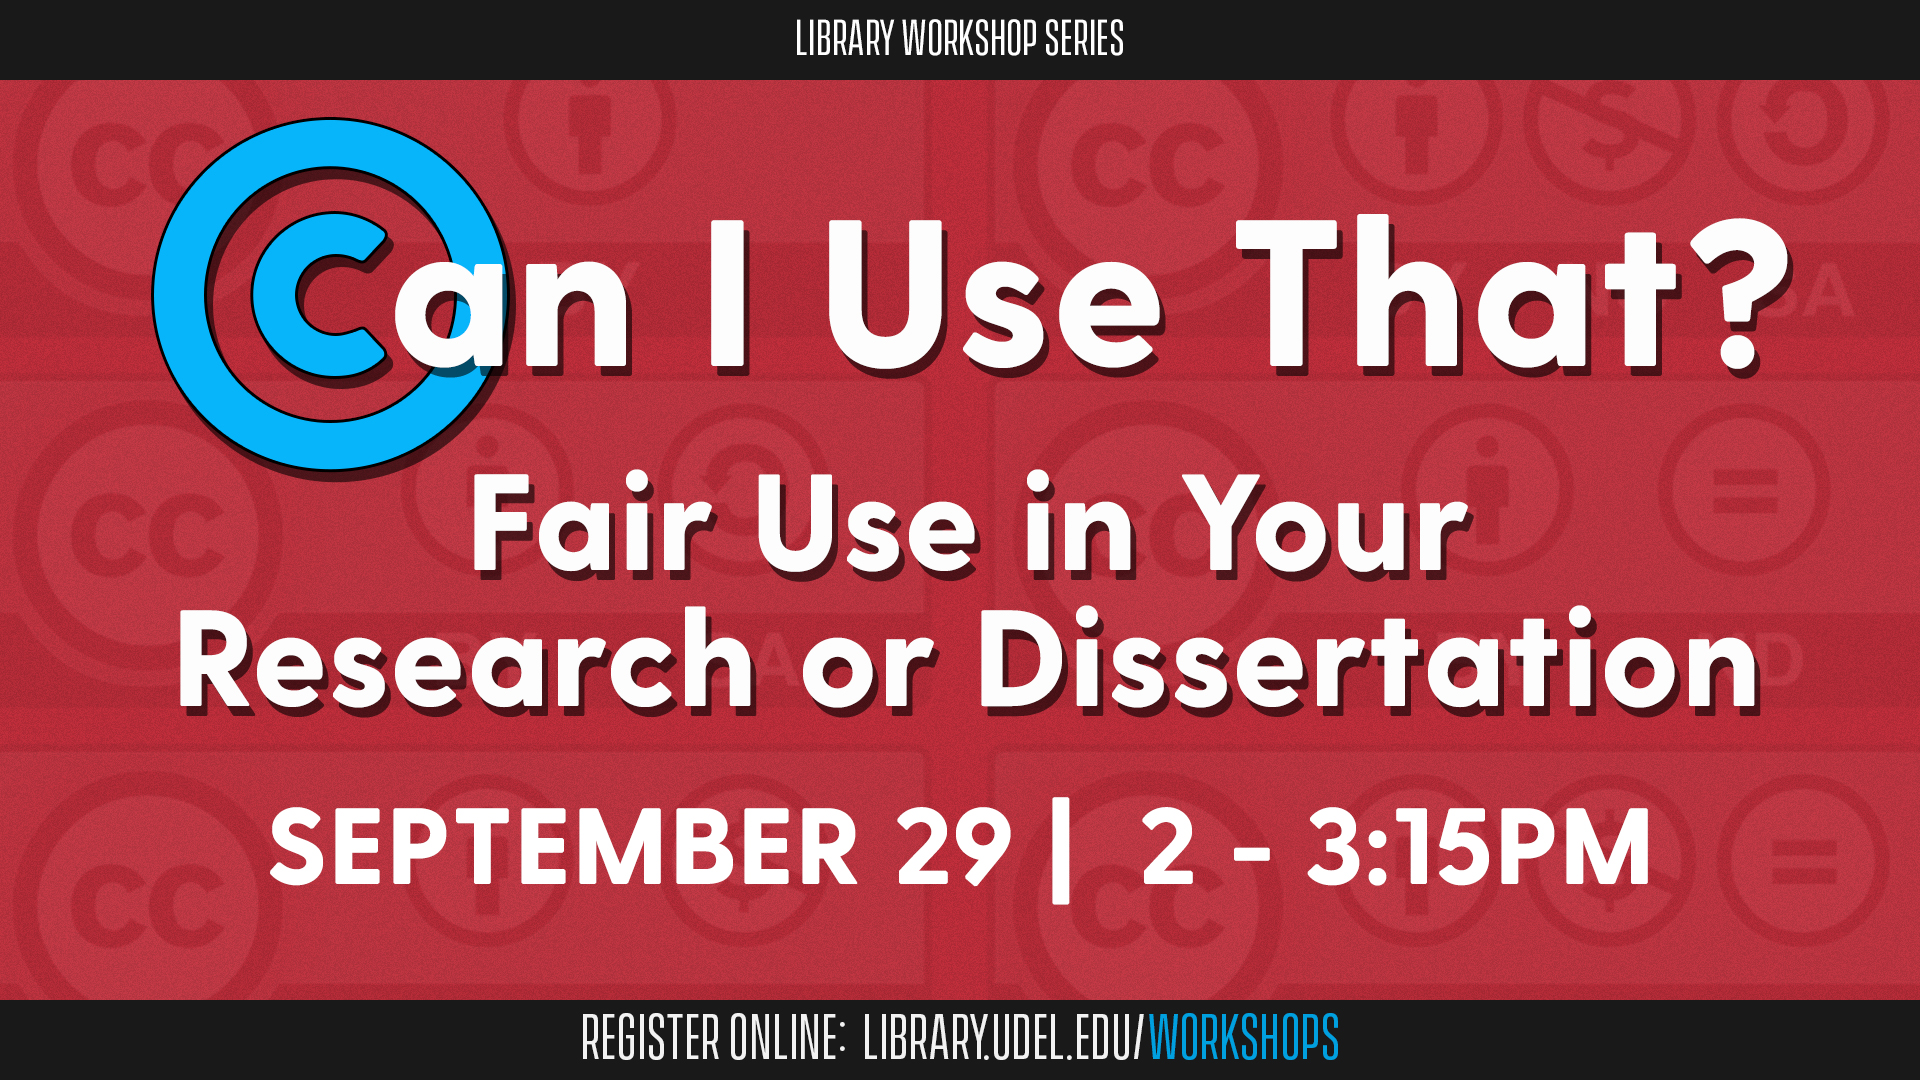 Can I Use That?: Fair Use in Your Research or Dissertation